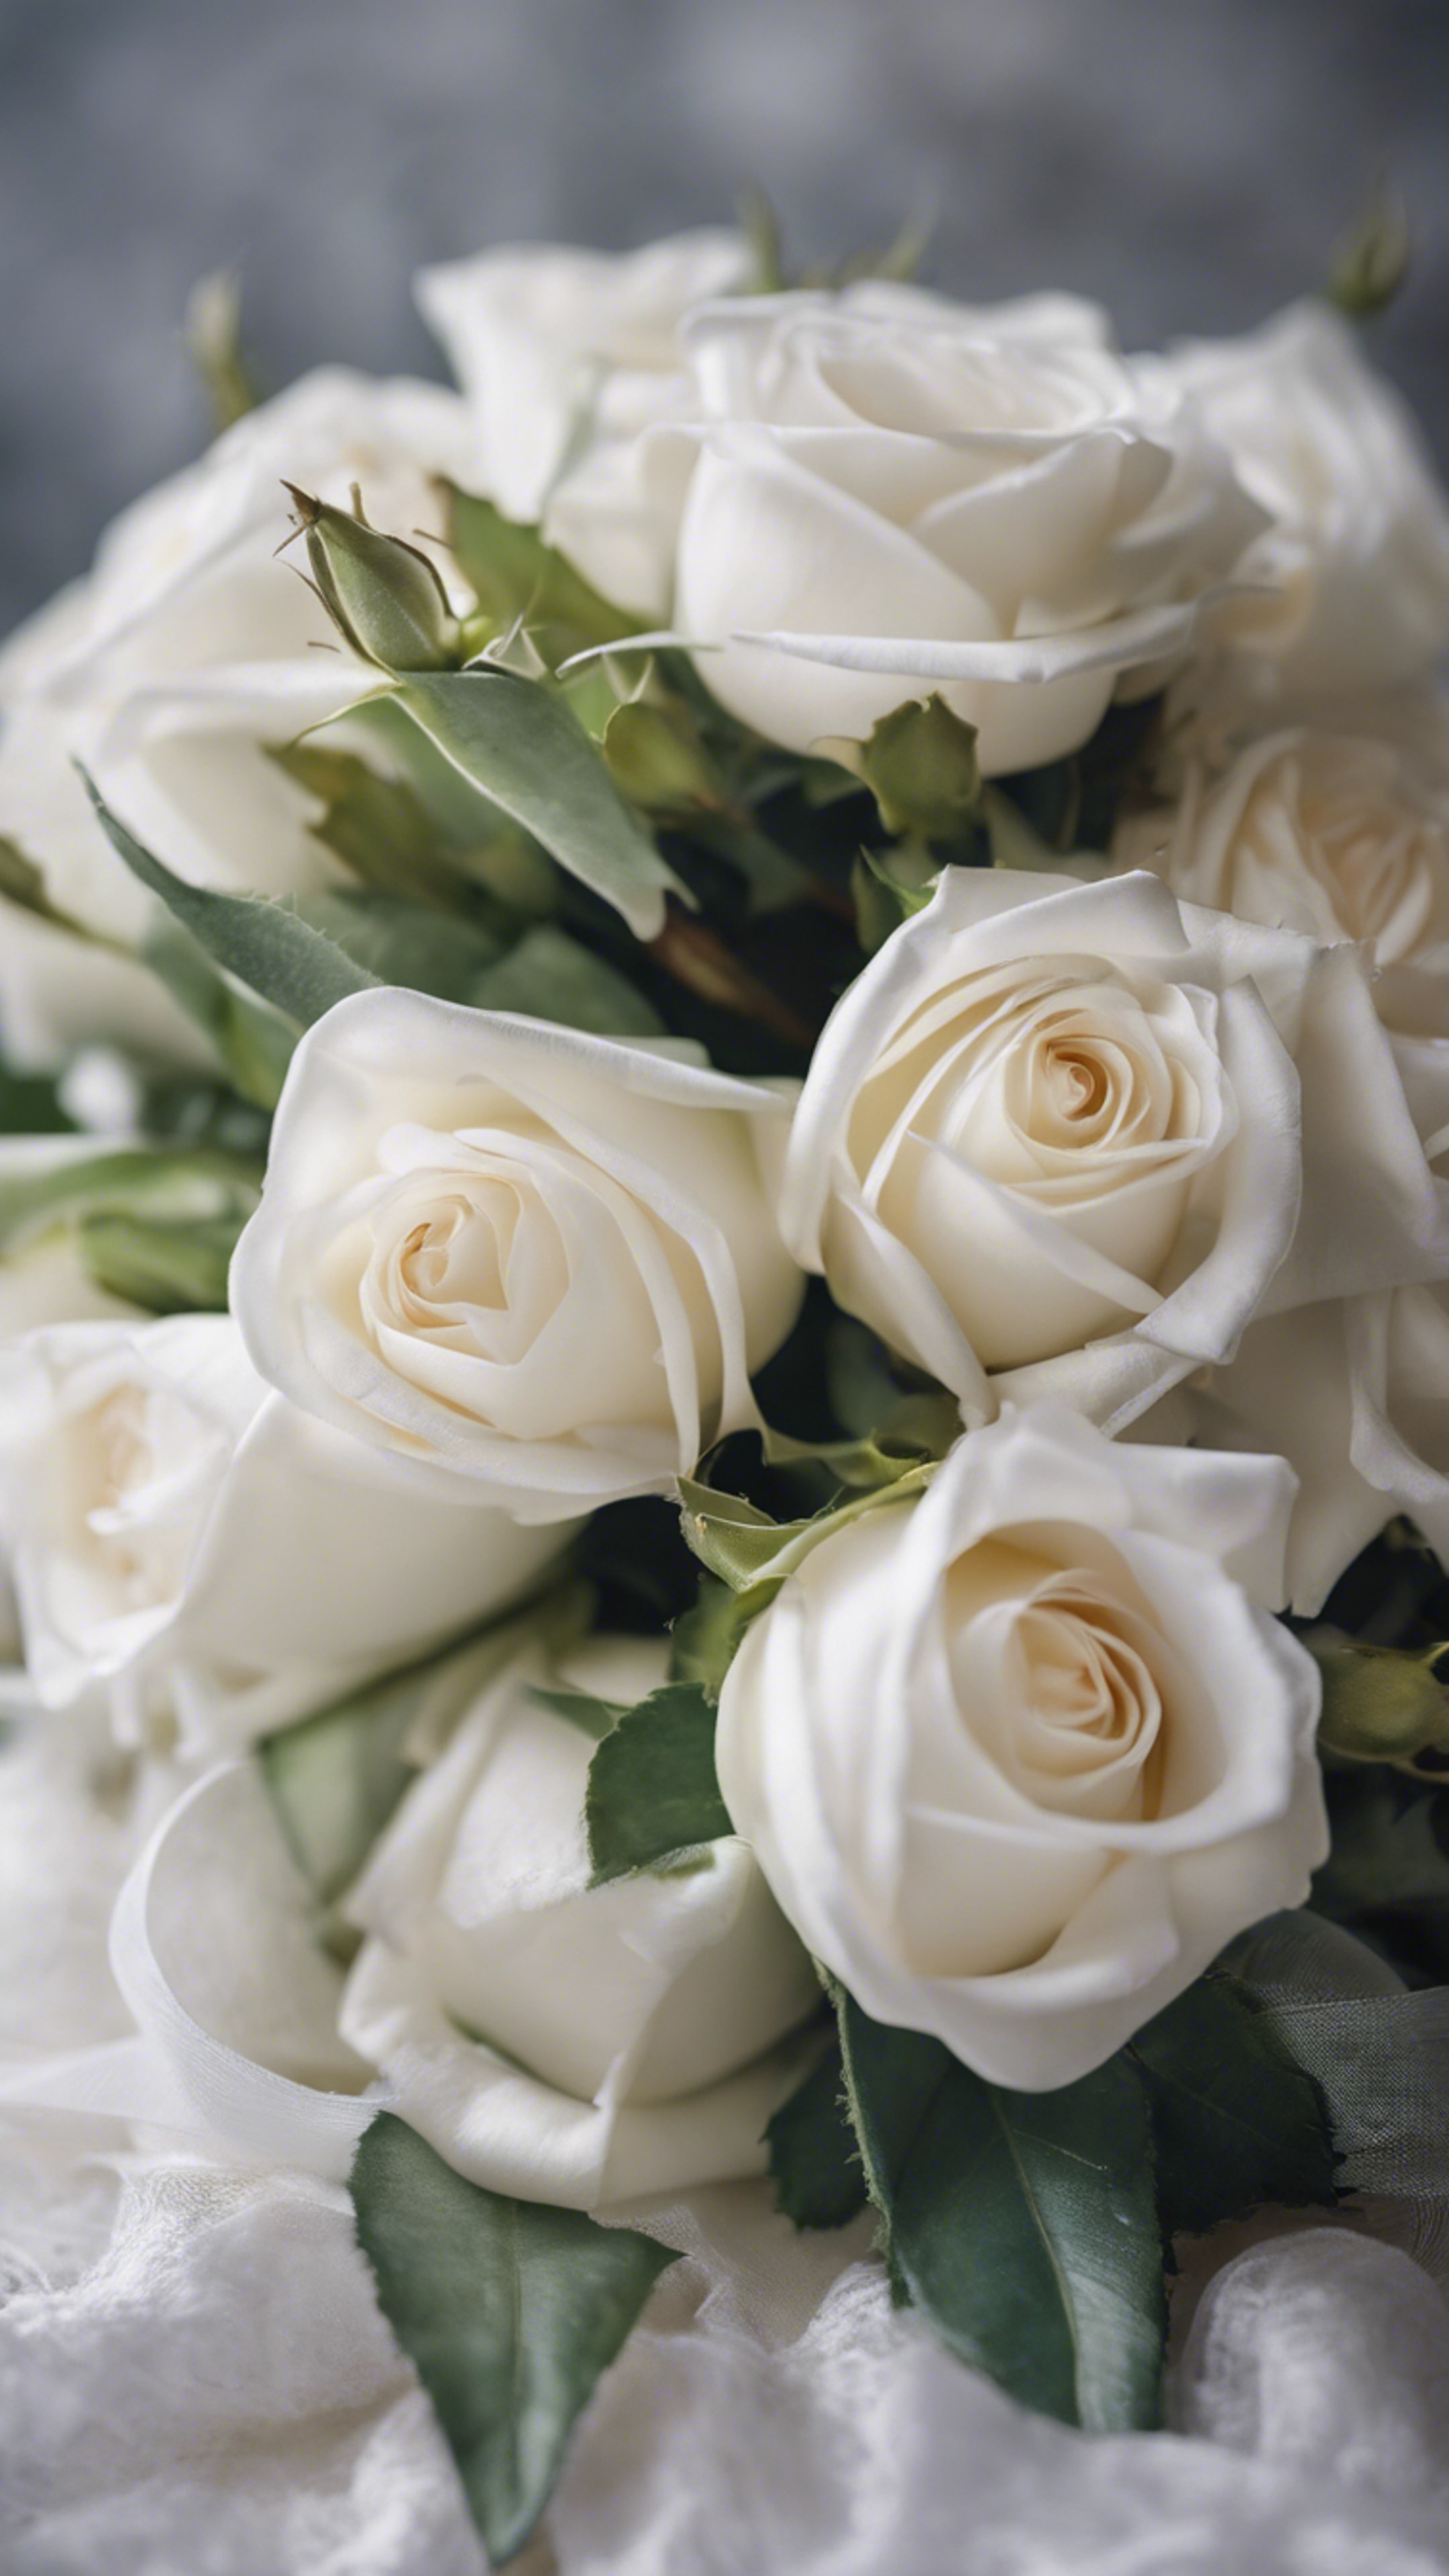 A bouquet of white roses wrapped in sheer white satin ribbon. Обои[5223d8c249ea42cfaf4b]